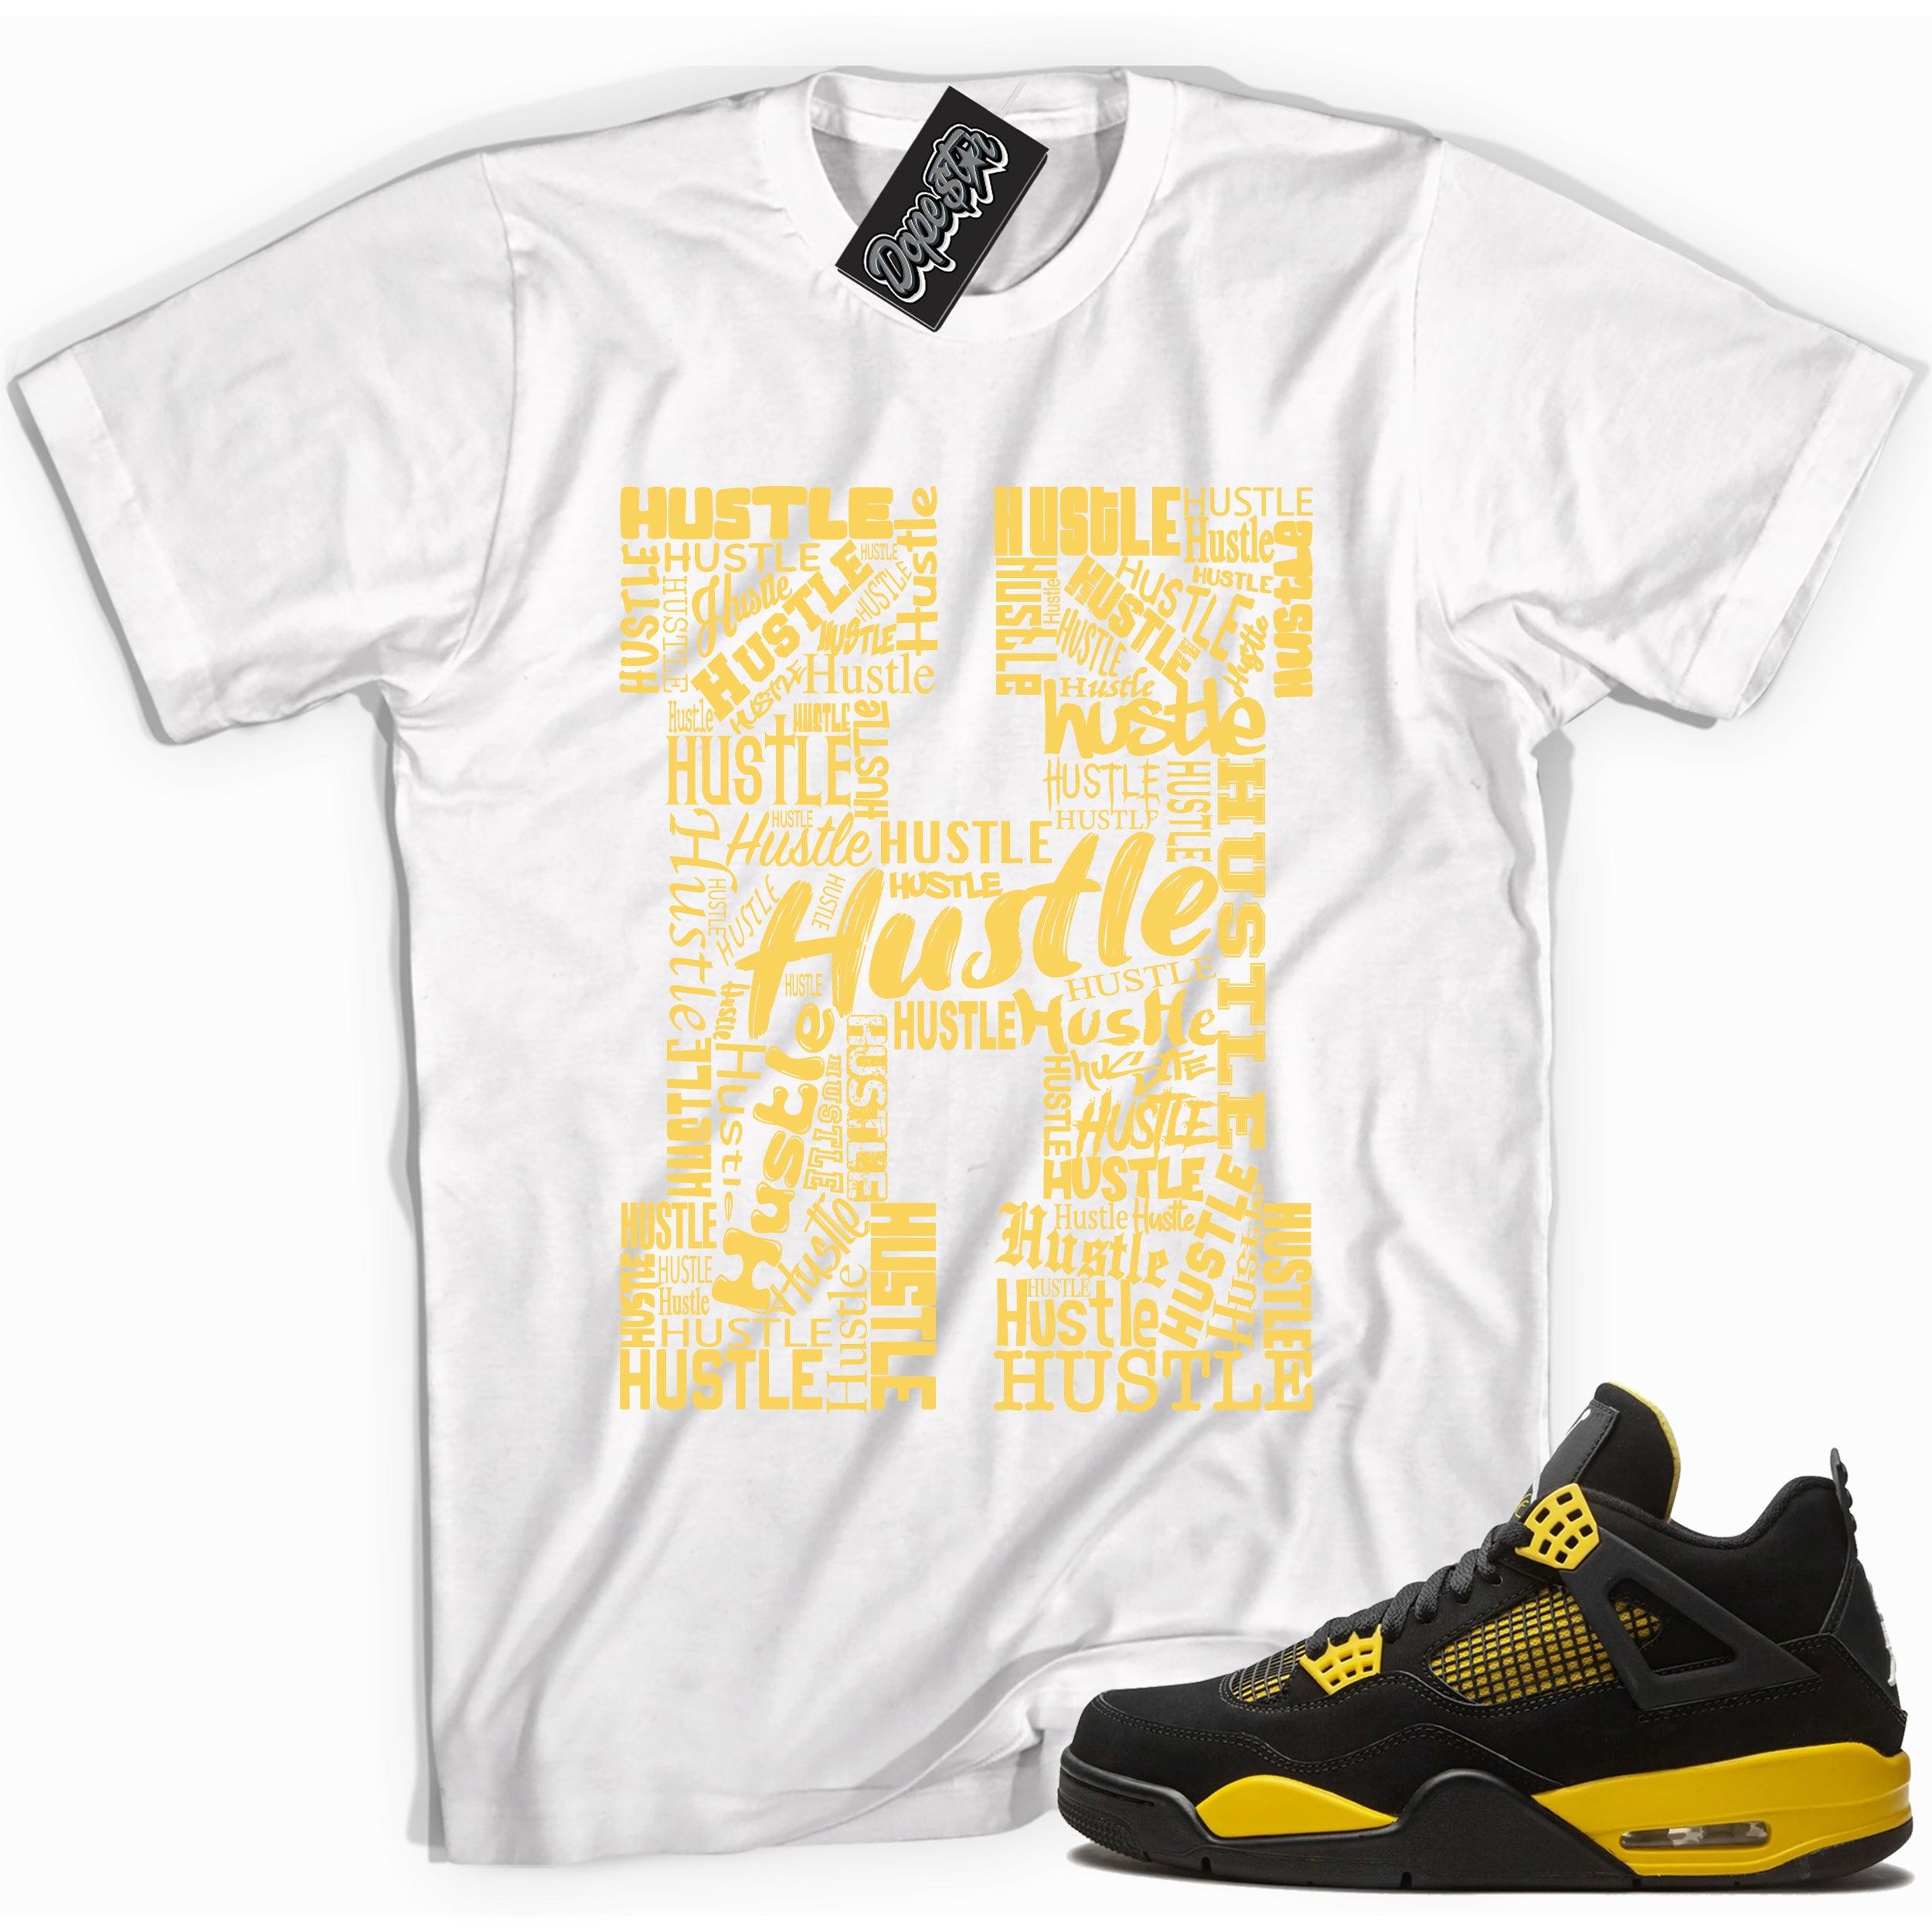 Cool white graphic tee with 'h for hustle' print, that perfectly matches Air Jordan 4 Thunder sneakers